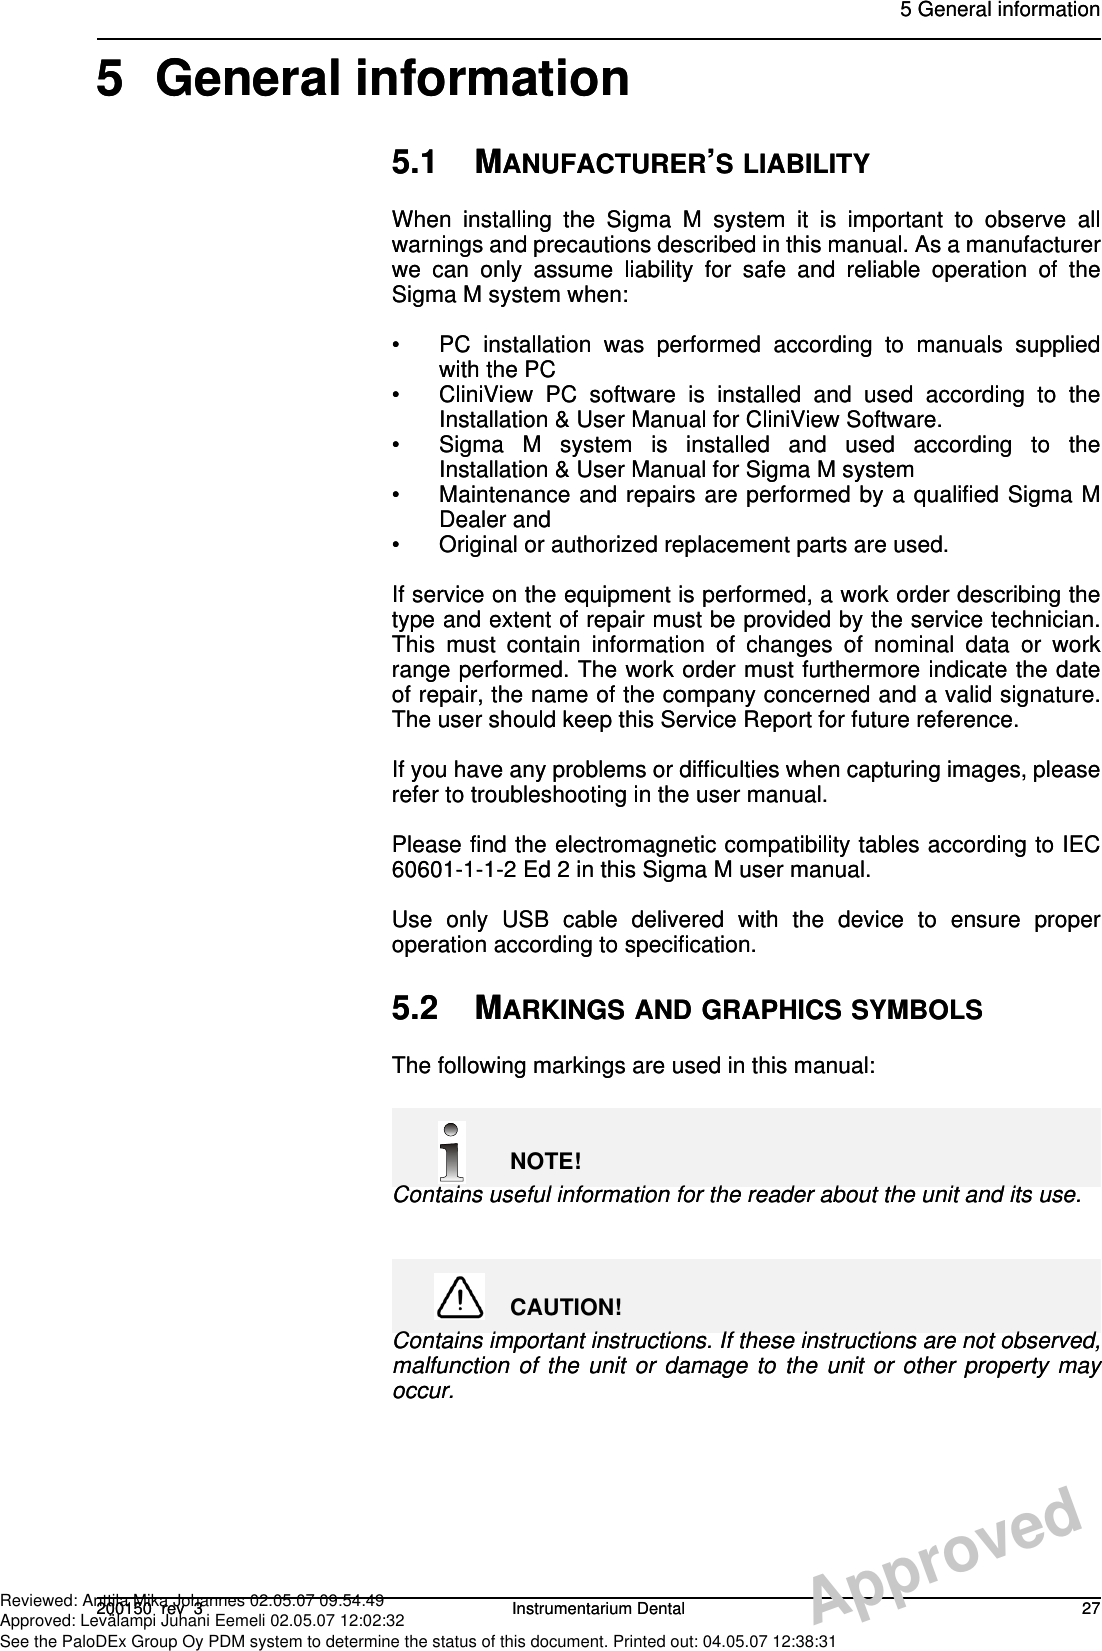 5 General information200150  rev  3 Instrumentarium Dental 275 General information5.1 MANUFACTURER’S LIABILITYWhen installing the Sigma M system it is important to observe allwarnings and precautions described in this manual. As a manufacturerwe can only assume liability for safe and reliable operation of theSigma M system when:• PC installation was performed according to manuals suppliedwith the PC• CliniView PC software is installed and used according to theInstallation &amp; User Manual for CliniView Software.• Sigma M system is installed and used according to theInstallation &amp; User Manual for Sigma M system• Maintenance and repairs are performed by a qualified Sigma MDealer and • Original or authorized replacement parts are used.If service on the equipment is performed, a work order describing thetype and extent of repair must be provided by the service technician.This must contain information of changes of nominal data or workrange performed. The work order must furthermore indicate the dateof repair, the name of the company concerned and a valid signature.The user should keep this Service Report for future reference.If you have any problems or difficulties when capturing images, pleaserefer to troubleshooting in the user manual.Please find the electromagnetic compatibility tables according to IEC60601-1-1-2 Ed 2 in this Sigma M user manual.Use only USB cable delivered with the device to ensure properoperation according to specification.5.2 MARKINGS AND GRAPHICS SYMBOLSThe following markings are used in this manual:NOTE!Contains useful information for the reader about the unit and its use.CAUTION!Contains important instructions. If these instructions are not observed,malfunction of the unit or damage to the unit or other property mayoccur.5 General information200150  rev  3 Instrumentarium Dental 275 General information5.1 MANUFACTURER’S LIABILITYWhen installing the Sigma M system it is important to observe allwarnings and precautions described in this manual. As a manufacturerwe can only assume liability for safe and reliable operation of theSigma M system when:• PC installation was performed according to manuals suppliedwith the PC• CliniView PC software is installed and used according to theInstallation &amp; User Manual for CliniView Software.• Sigma M system is installed and used according to theInstallation &amp; User Manual for Sigma M system• Maintenance and repairs are performed by a qualified Sigma MDealer and • Original or authorized replacement parts are used.If service on the equipment is performed, a work order describing thetype and extent of repair must be provided by the service technician.This must contain information of changes of nominal data or workrange performed. The work order must furthermore indicate the dateof repair, the name of the company concerned and a valid signature.The user should keep this Service Report for future reference.If you have any problems or difficulties when capturing images, pleaserefer to troubleshooting in the user manual.Please find the electromagnetic compatibility tables according to IEC60601-1-1-2 Ed 2 in this Sigma M user manual.Use only USB cable delivered with the device to ensure properoperation according to specification.5.2 MARKINGS AND GRAPHICS SYMBOLSThe following markings are used in this manual:NOTE!Contains useful information for the reader about the unit and its use.CAUTION!Contains important instructions. If these instructions are not observed,malfunction of the unit or damage to the unit or other property mayoccur.ApprovedReviewed: Anttila Mika Johannes 02.05.07 09:54:49Approved: Levälampi Juhani Eemeli 02.05.07 12:02:32See the PaloDEx Group Oy PDM system to determine the status of this document. Printed out: 04.05.07 12:38:31